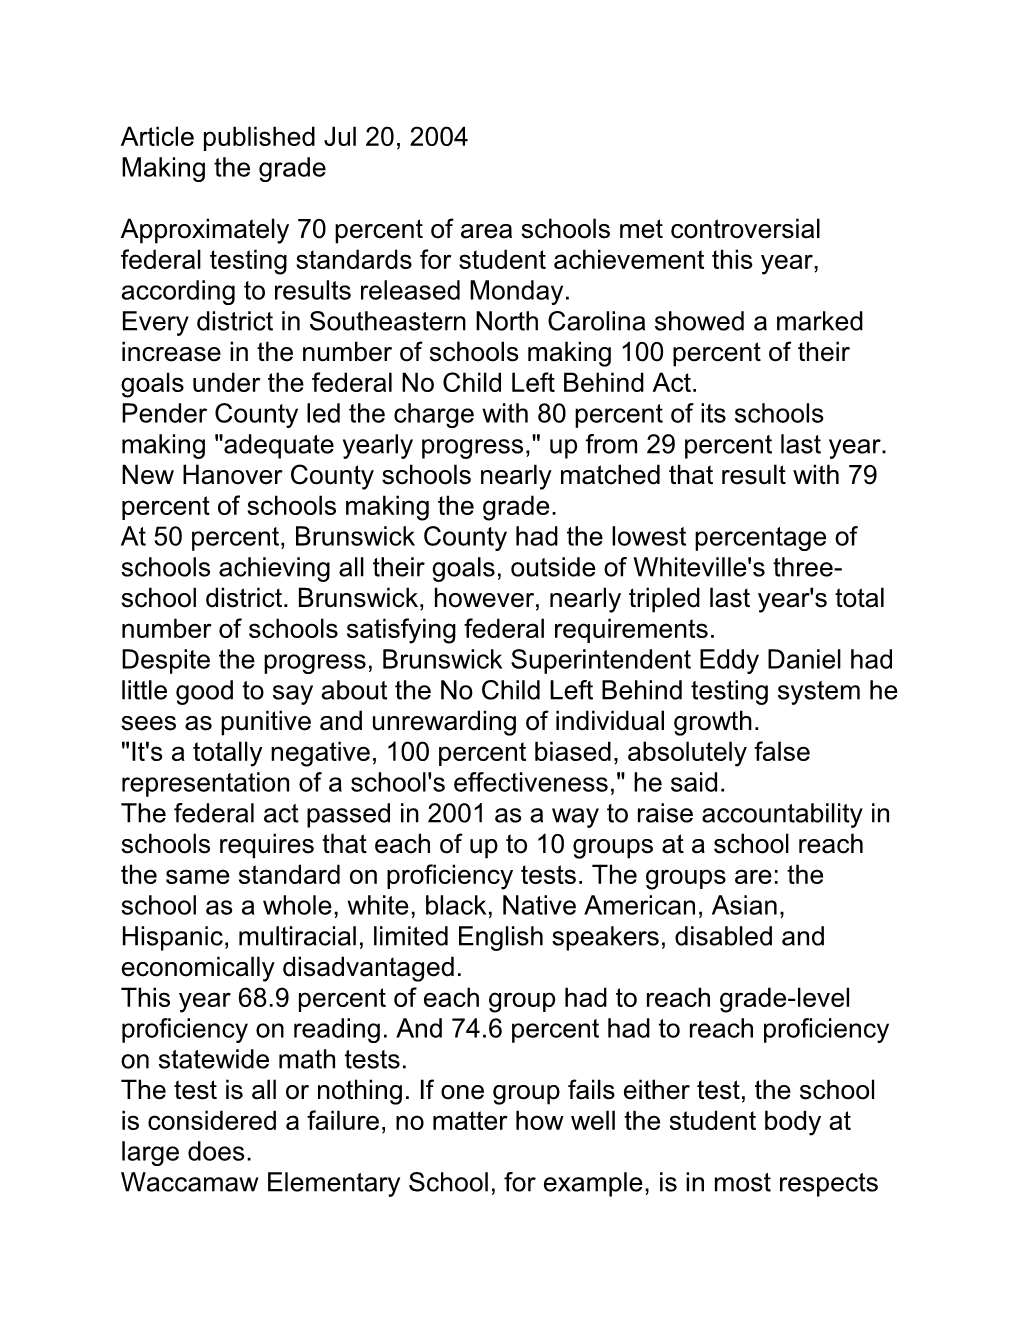 Article Published Jul 20, 2004 Making the Grade Approximately 70 Percent of Area Schools